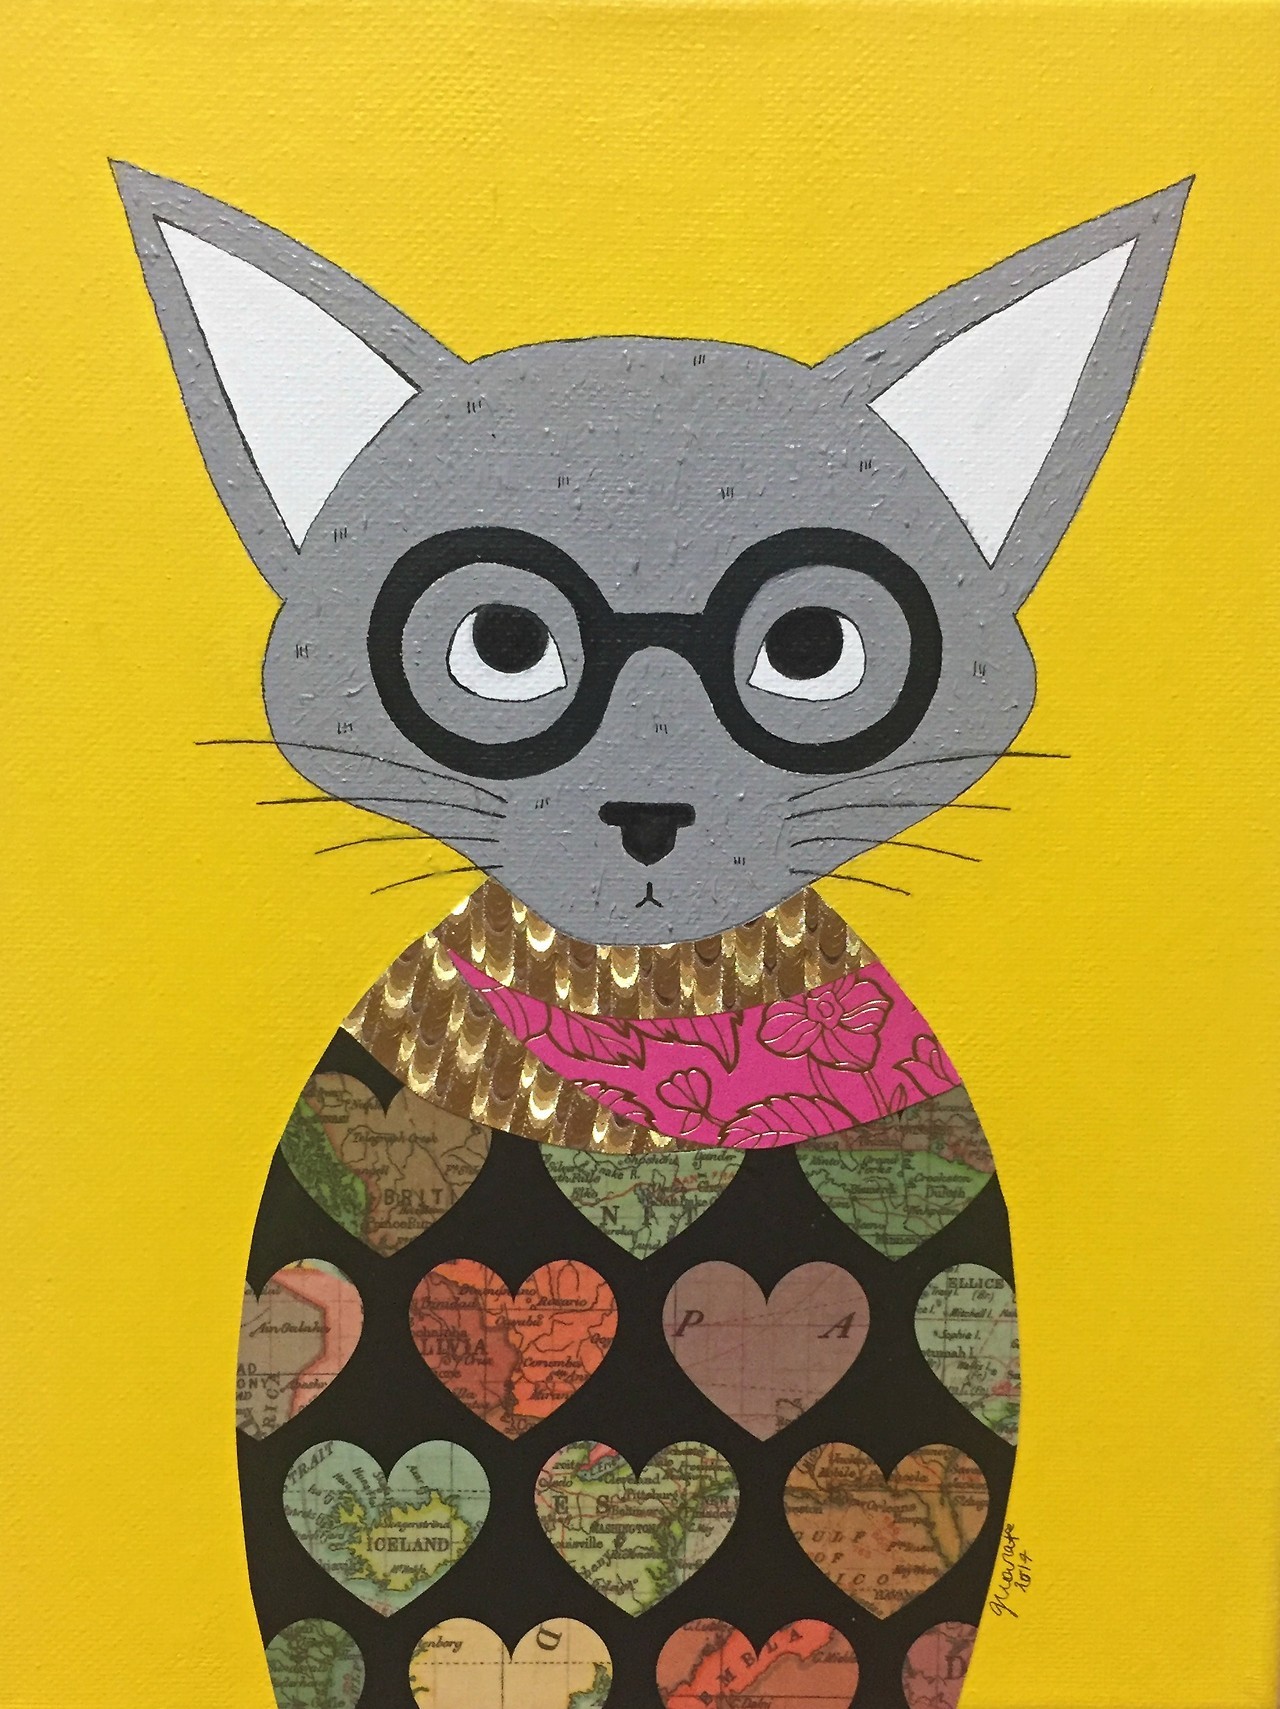 Kitty 1 by J`Lichi Arts Mixed Media Painting on Canvas https://www.instagram.com/juana_lichi/ — Immediately post your art to a topic and get feedback. Join our new community, EatSleepDraw Studio, today!